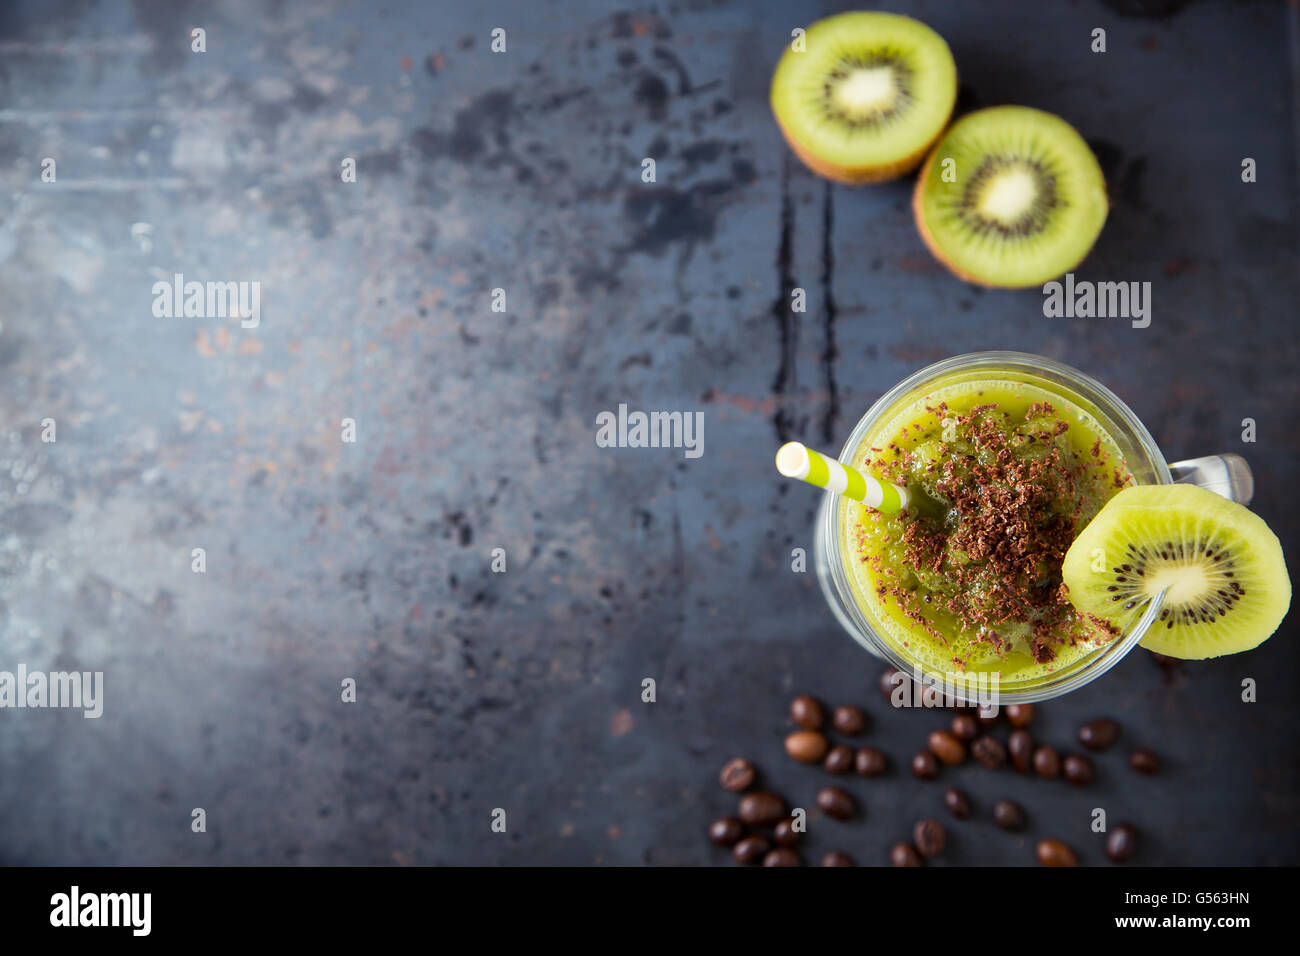 Green smoothie of kiwi sprinkled with chocolate Stock Photo